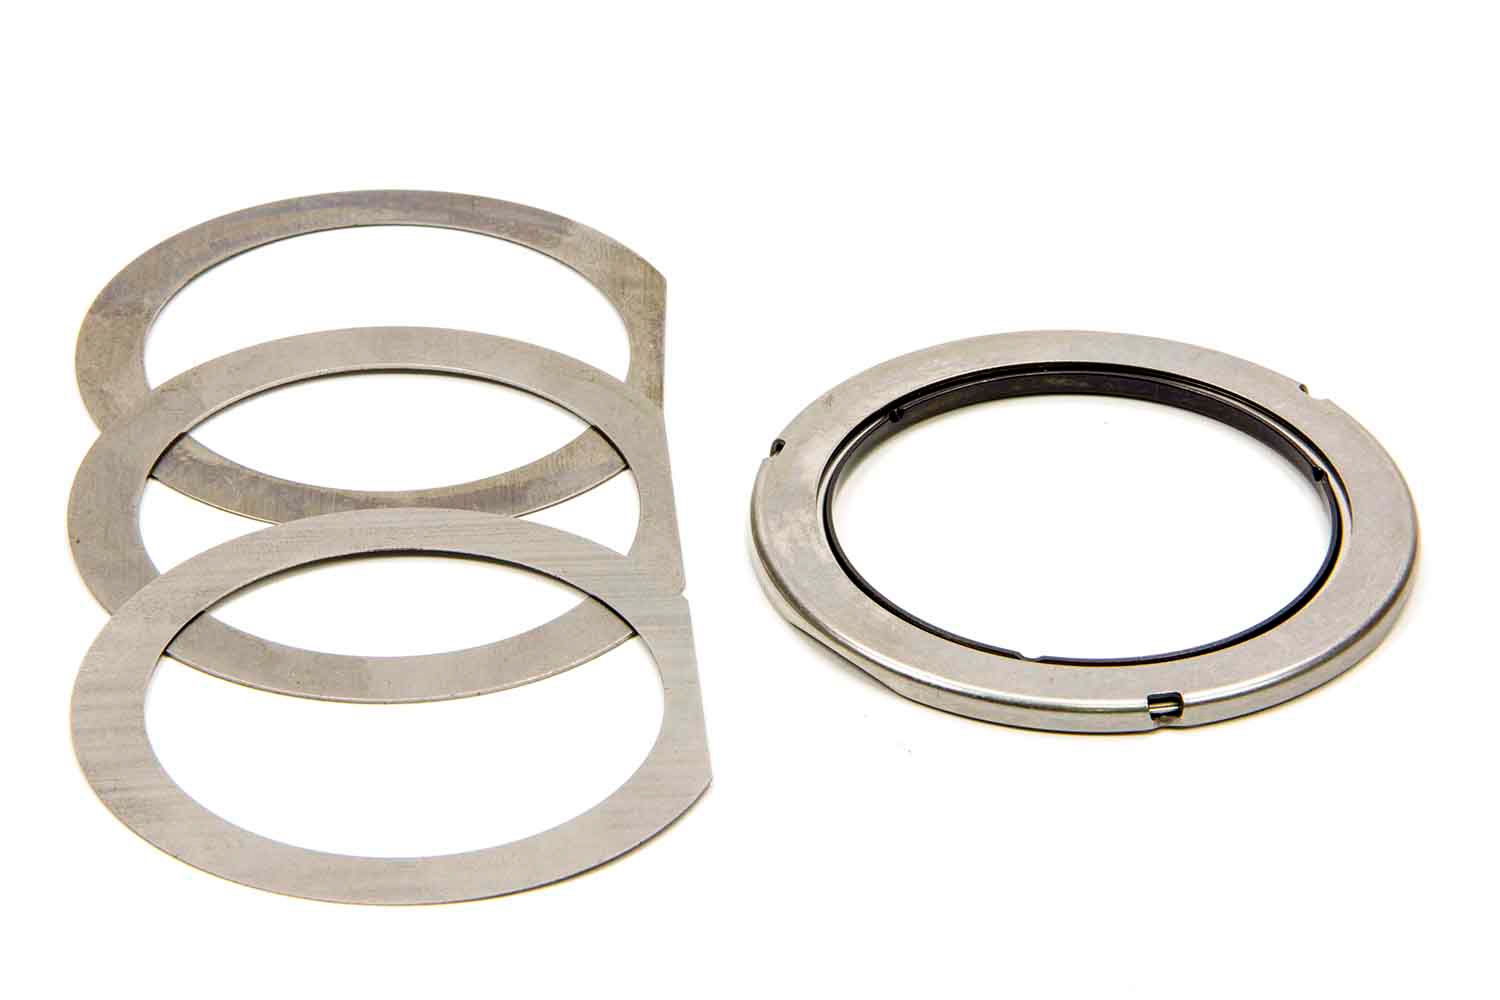 TCI 224400 Rear Case Thrust Bearing, 0.010 / 0.015 / 0.020 in Washers Included, Roller, Steel, TH400, Kit